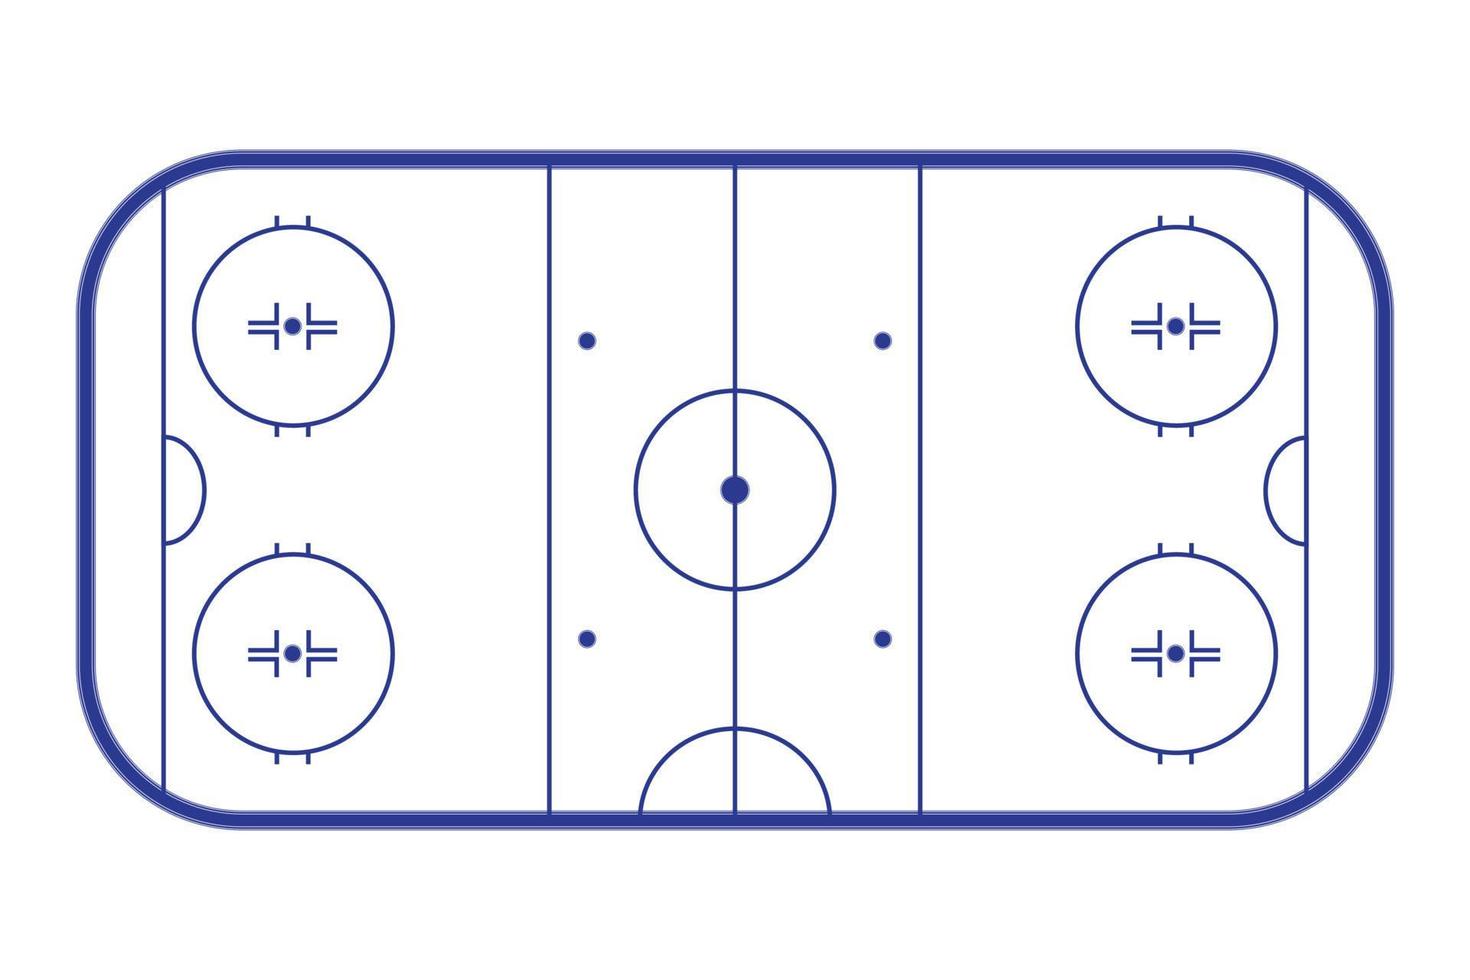 Ice hockey rink, top view. Hockey field outline isolated on white background. Vector illustration.